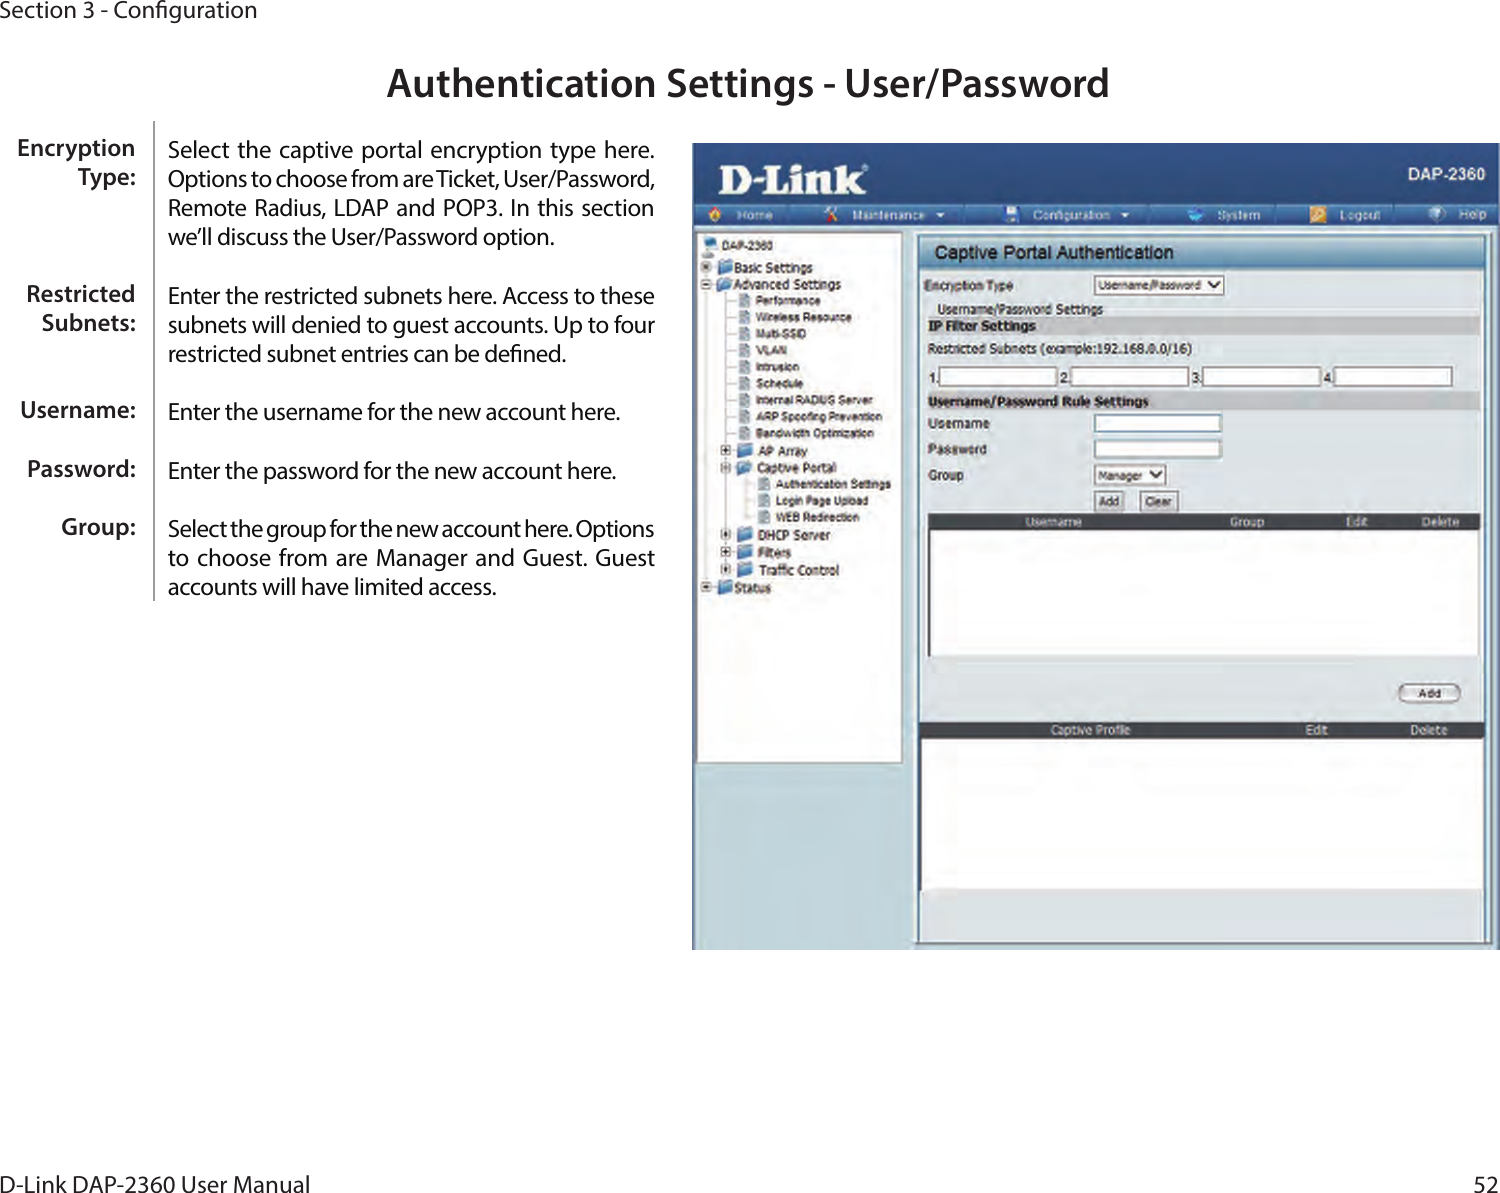 52D-Link DAP-2360 User ManualSection 3 - CongurationAuthentication Settings - User/PasswordSelect the captive portal encryption type here. Options to choose from are Ticket, User/Password, Remote Radius, LDAP and POP3. In this section we’ll discuss the User/Password option.Enter the restricted subnets here. Access to these subnets will denied to guest accounts. Up to four restricted subnet entries can be dened.Enter the username for the new account here.Enter the password for the new account here.Select the group for the new account here. Options to choose from  are Manager and Guest. Guest accounts will have limited access.Encryption Type:Restricted Subnets:Username:Password:Group: